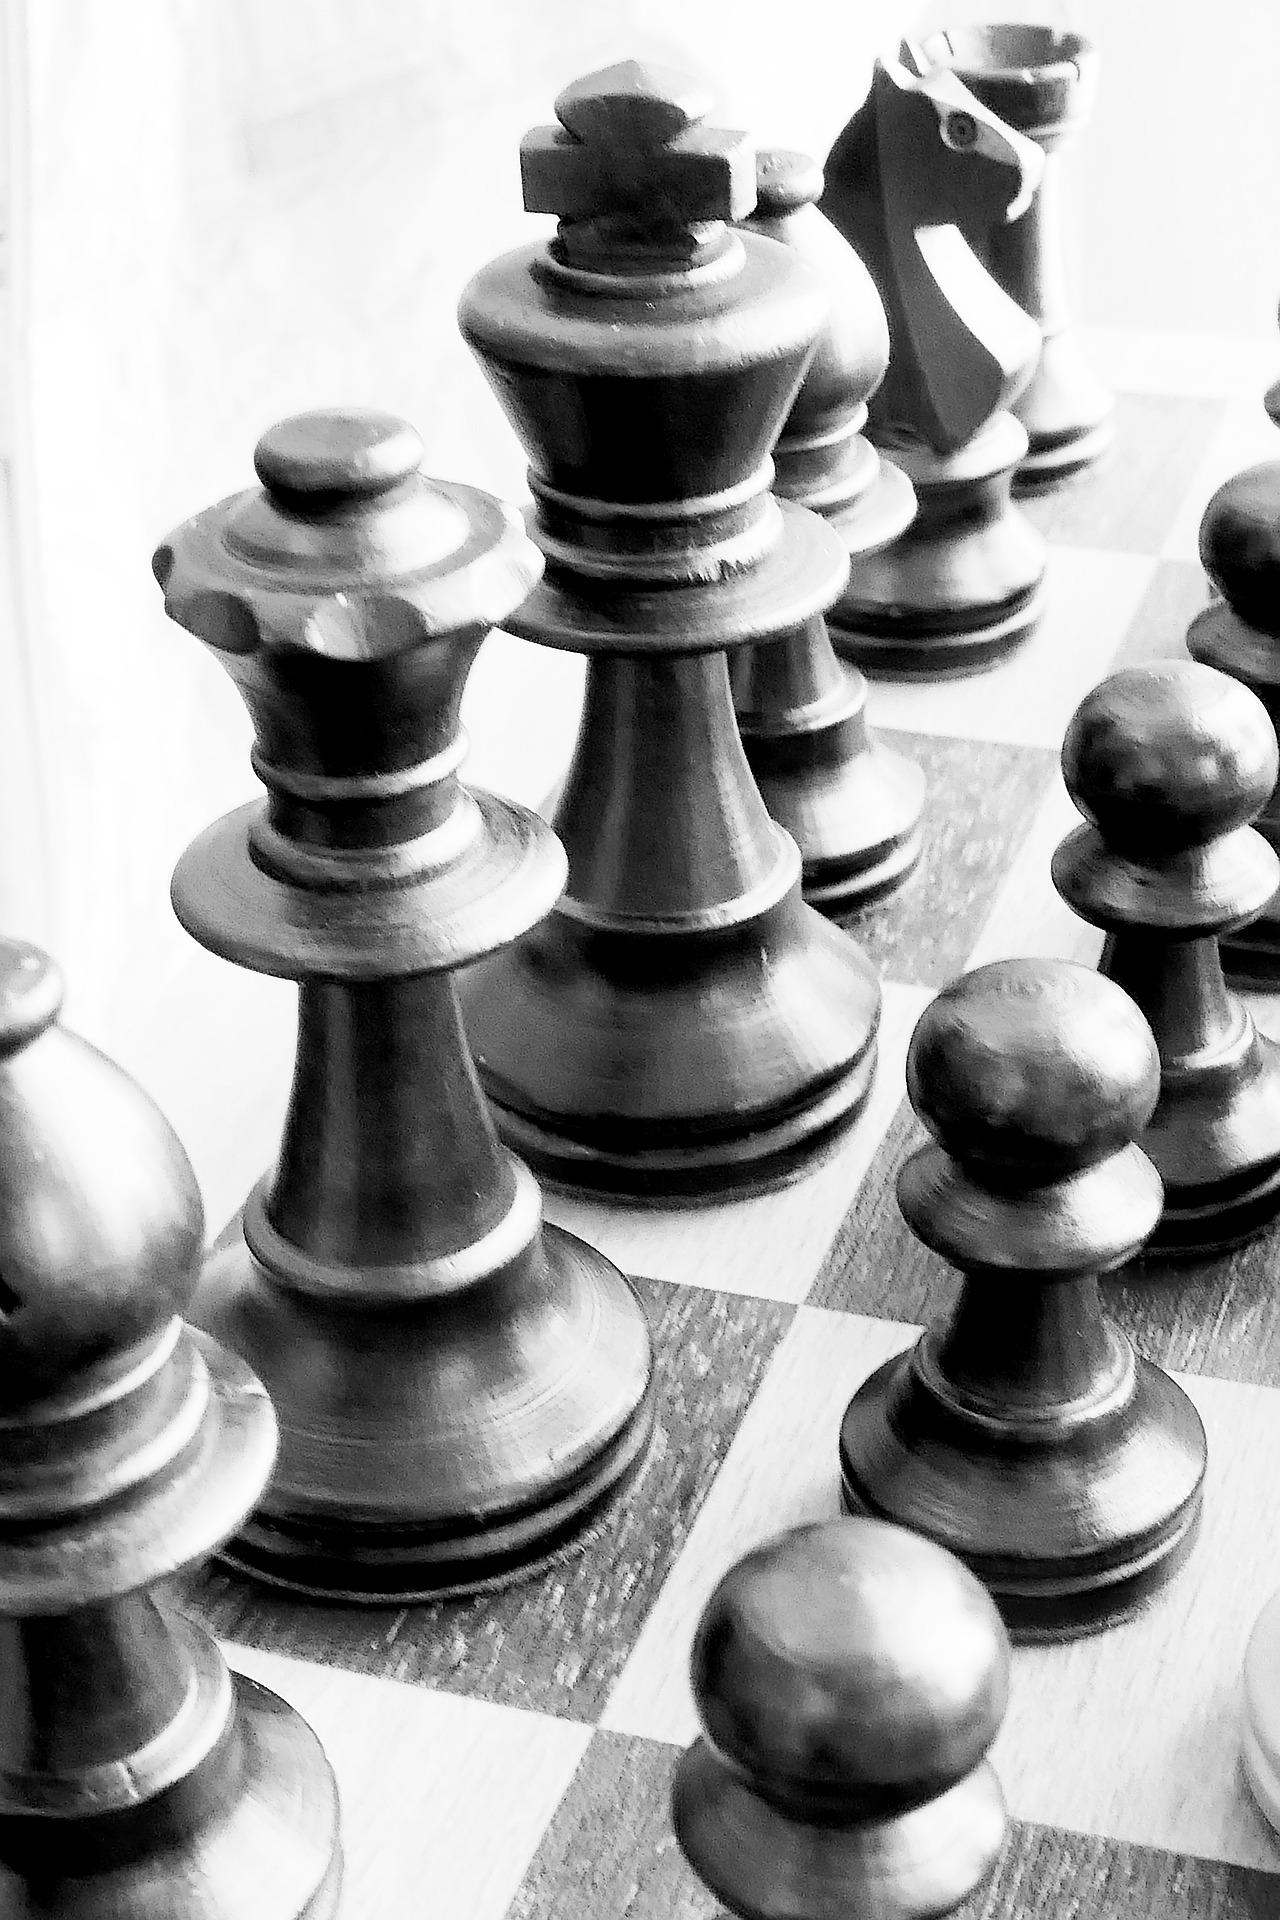 When was Enpassant invented in Chess?